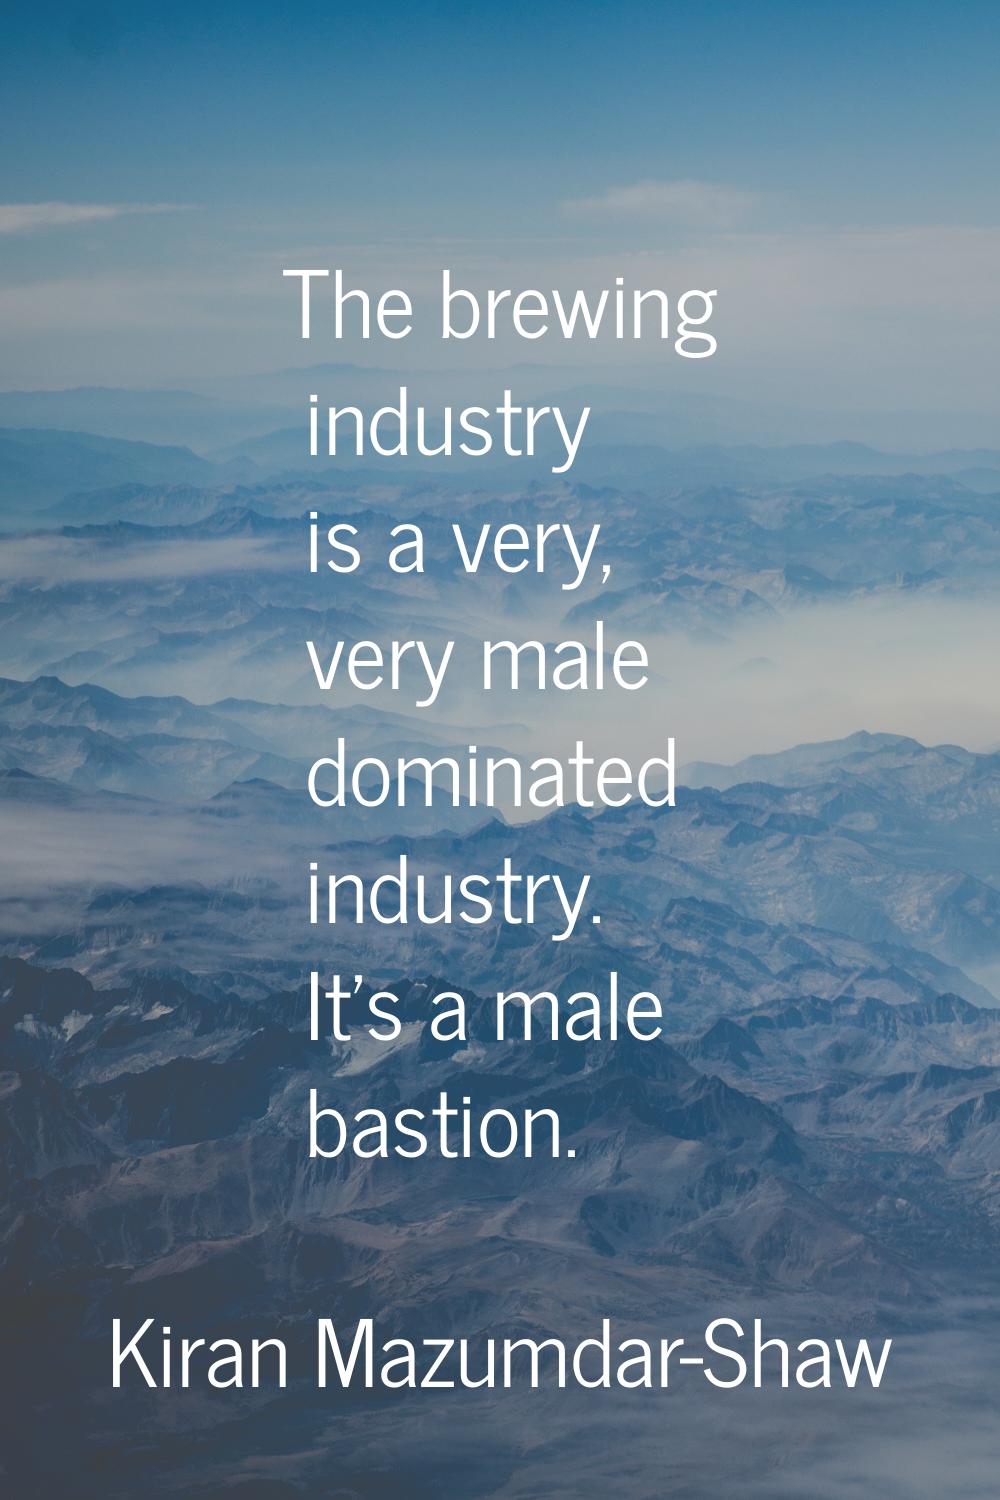 The brewing industry is a very, very male dominated industry. It's a male bastion.